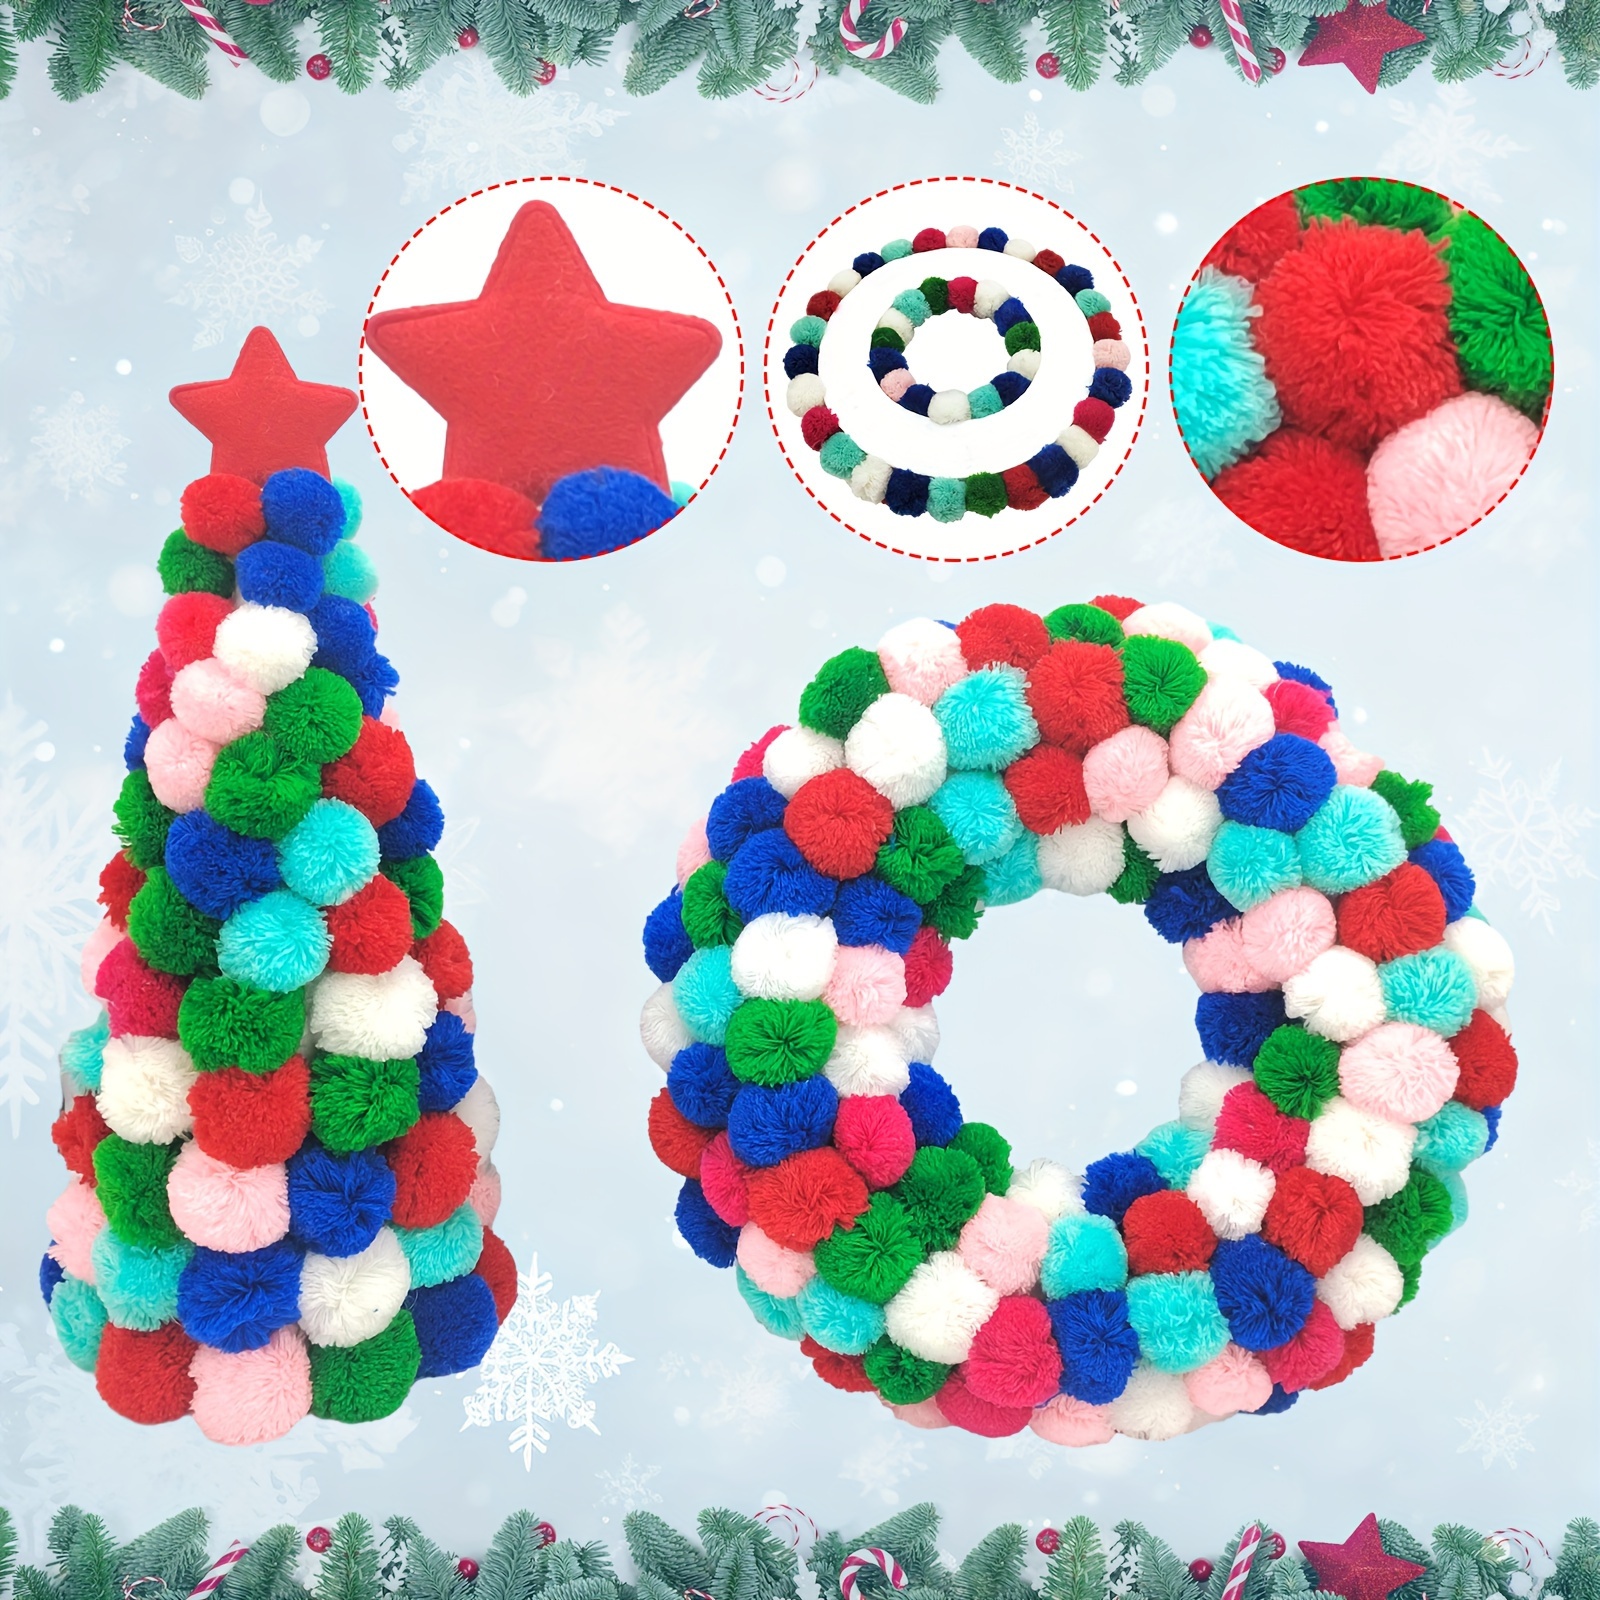 Wool Pom Pom Garland Decor for Christmas Party (Red, White, Green